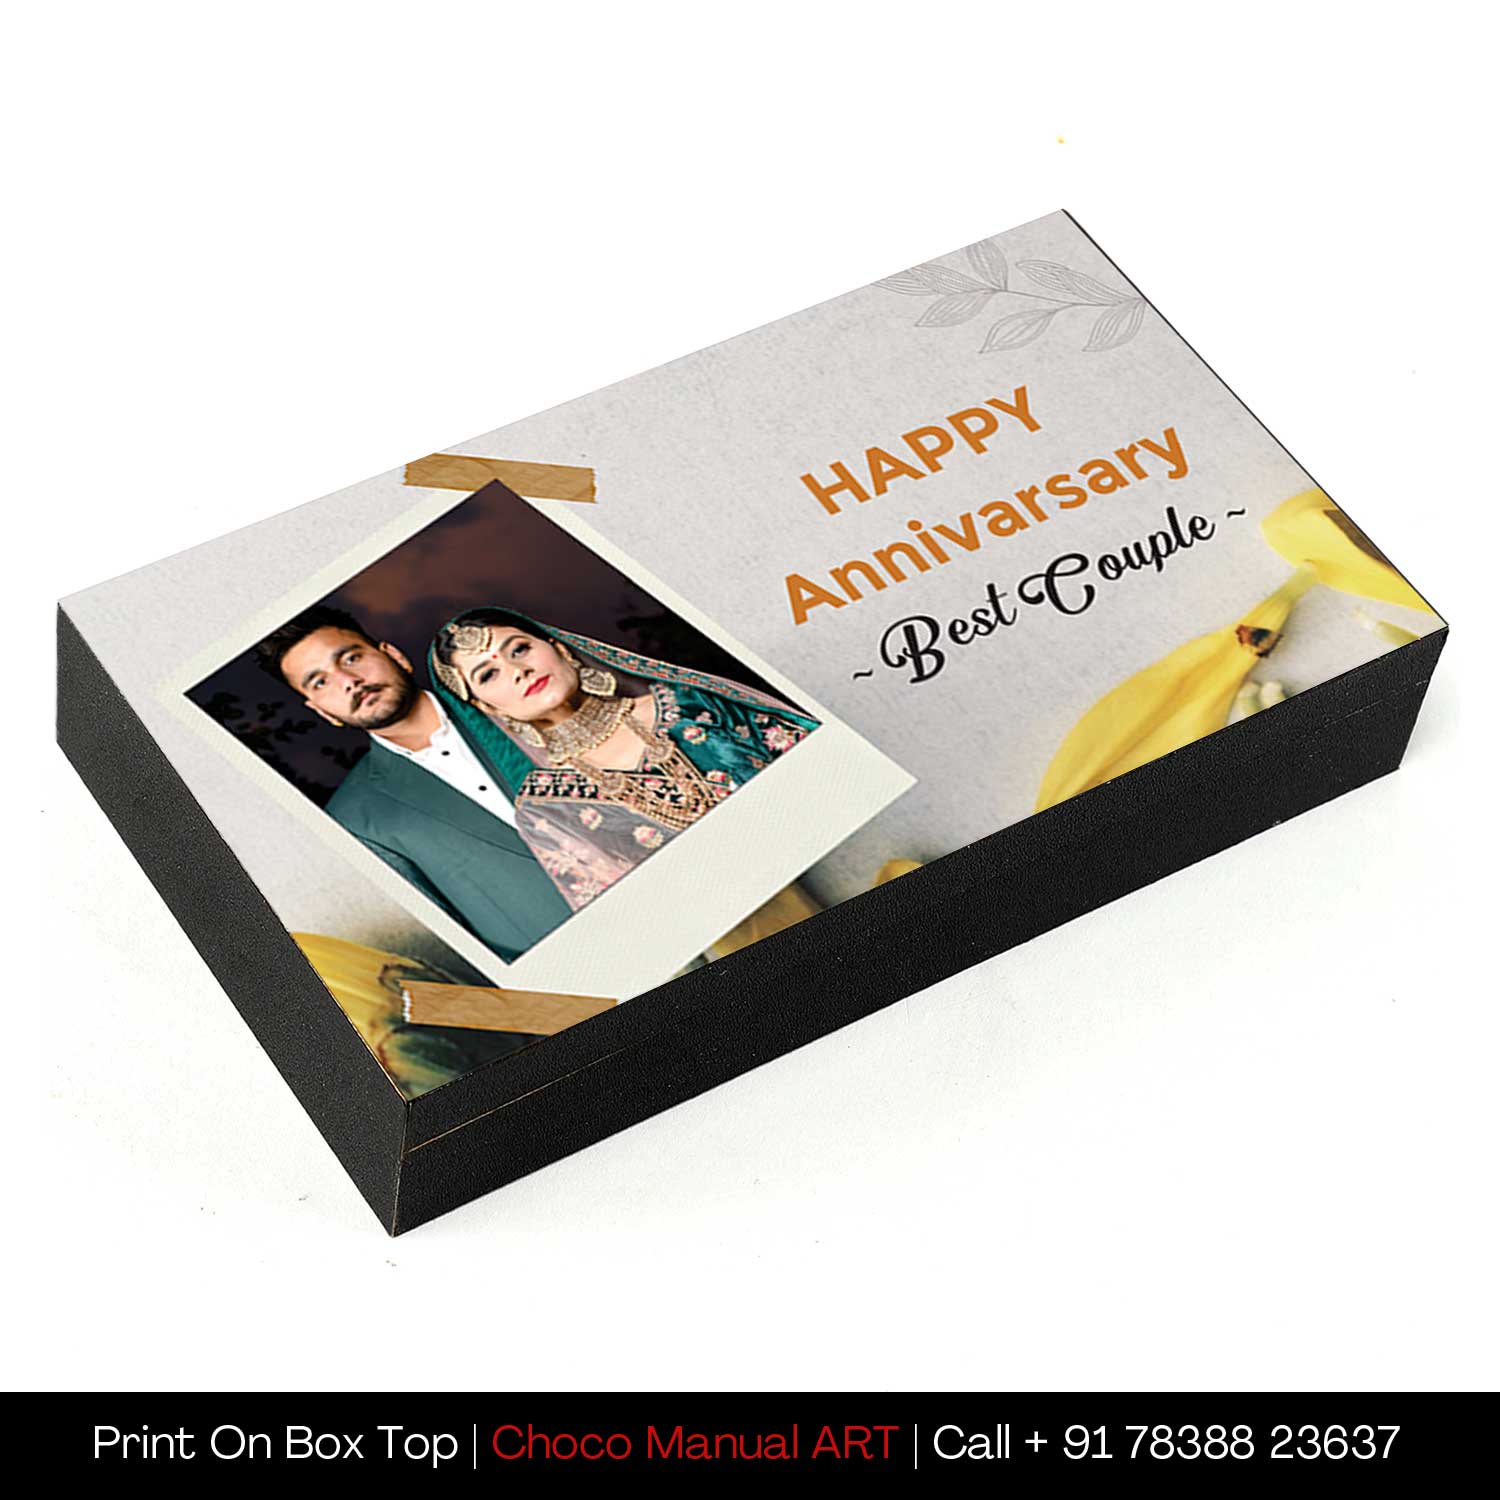 Personalized Printed Chocolates Gifts for Wedding Anniversary